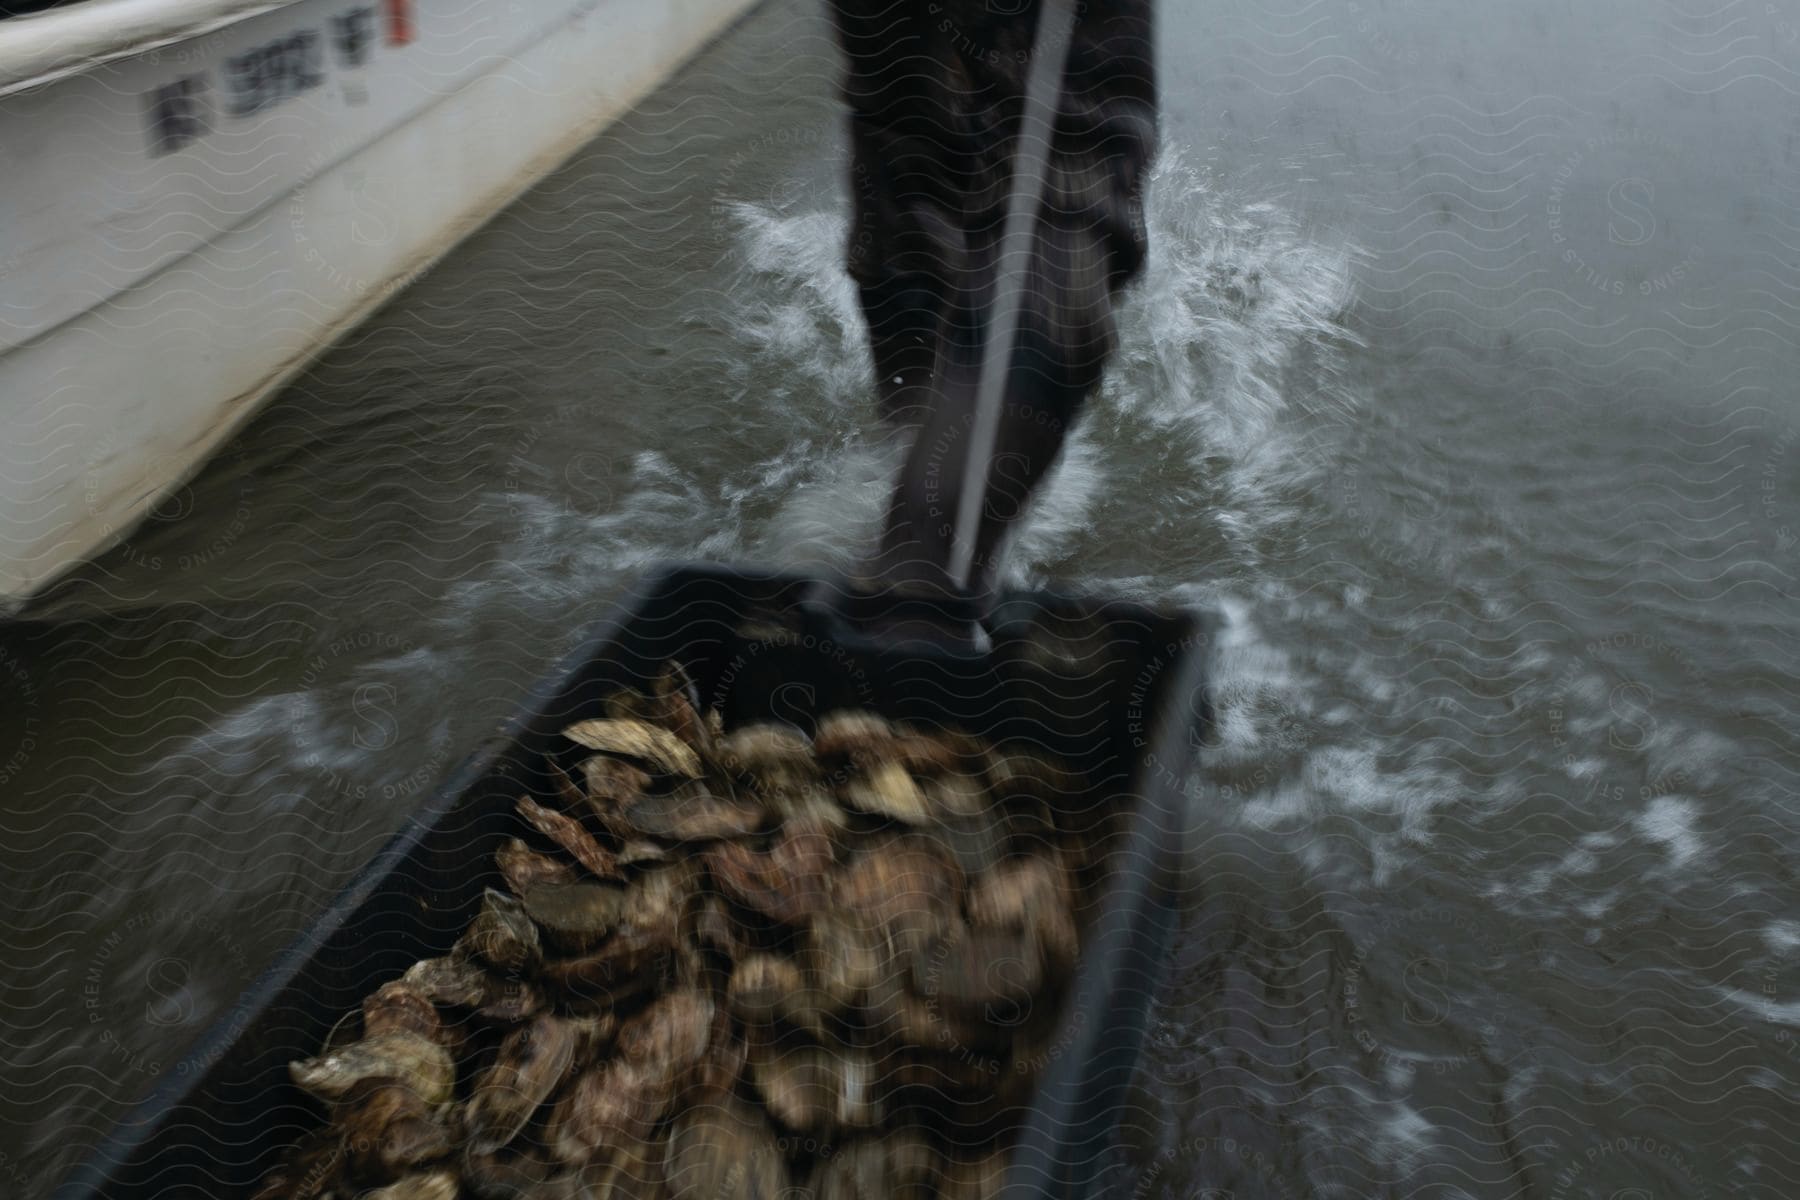 A person drags a container of oysters through the water next to a boat creating ripples